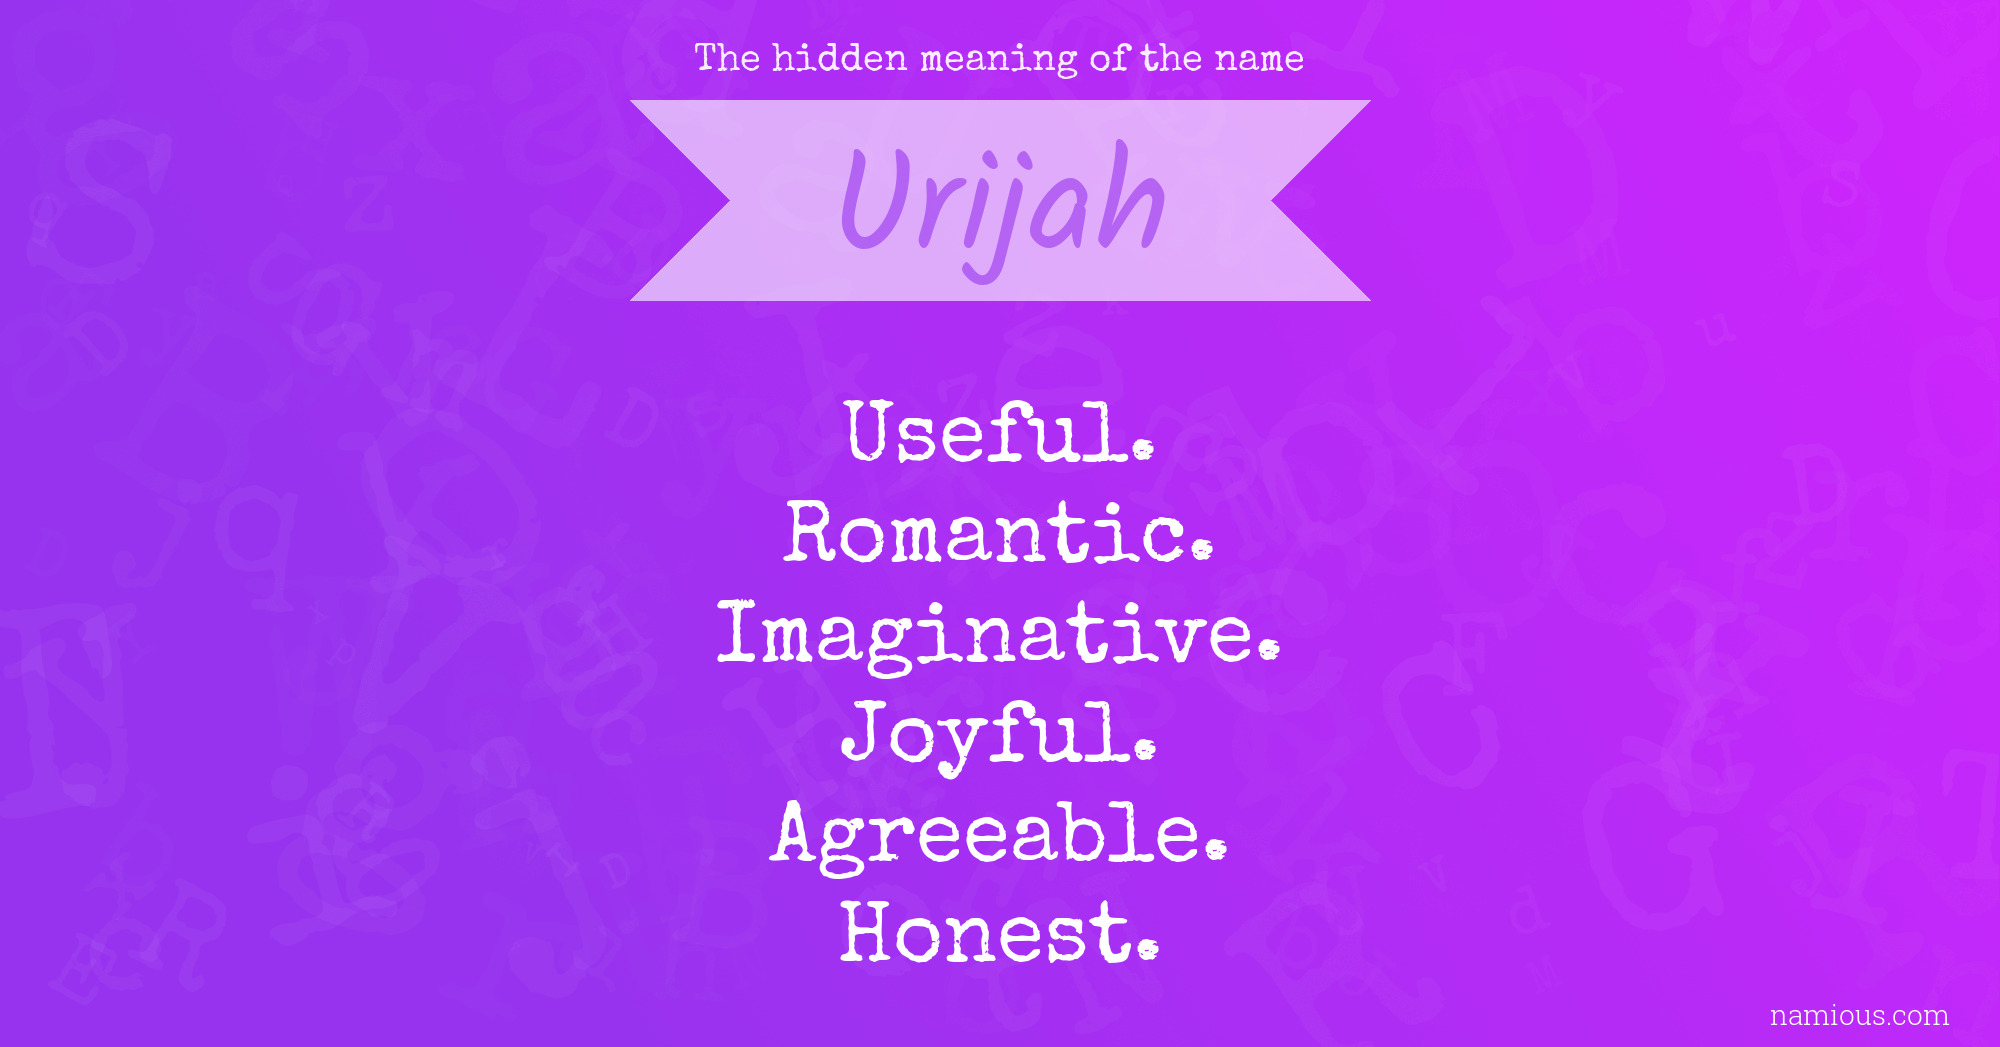 The hidden meaning of the name Urijah